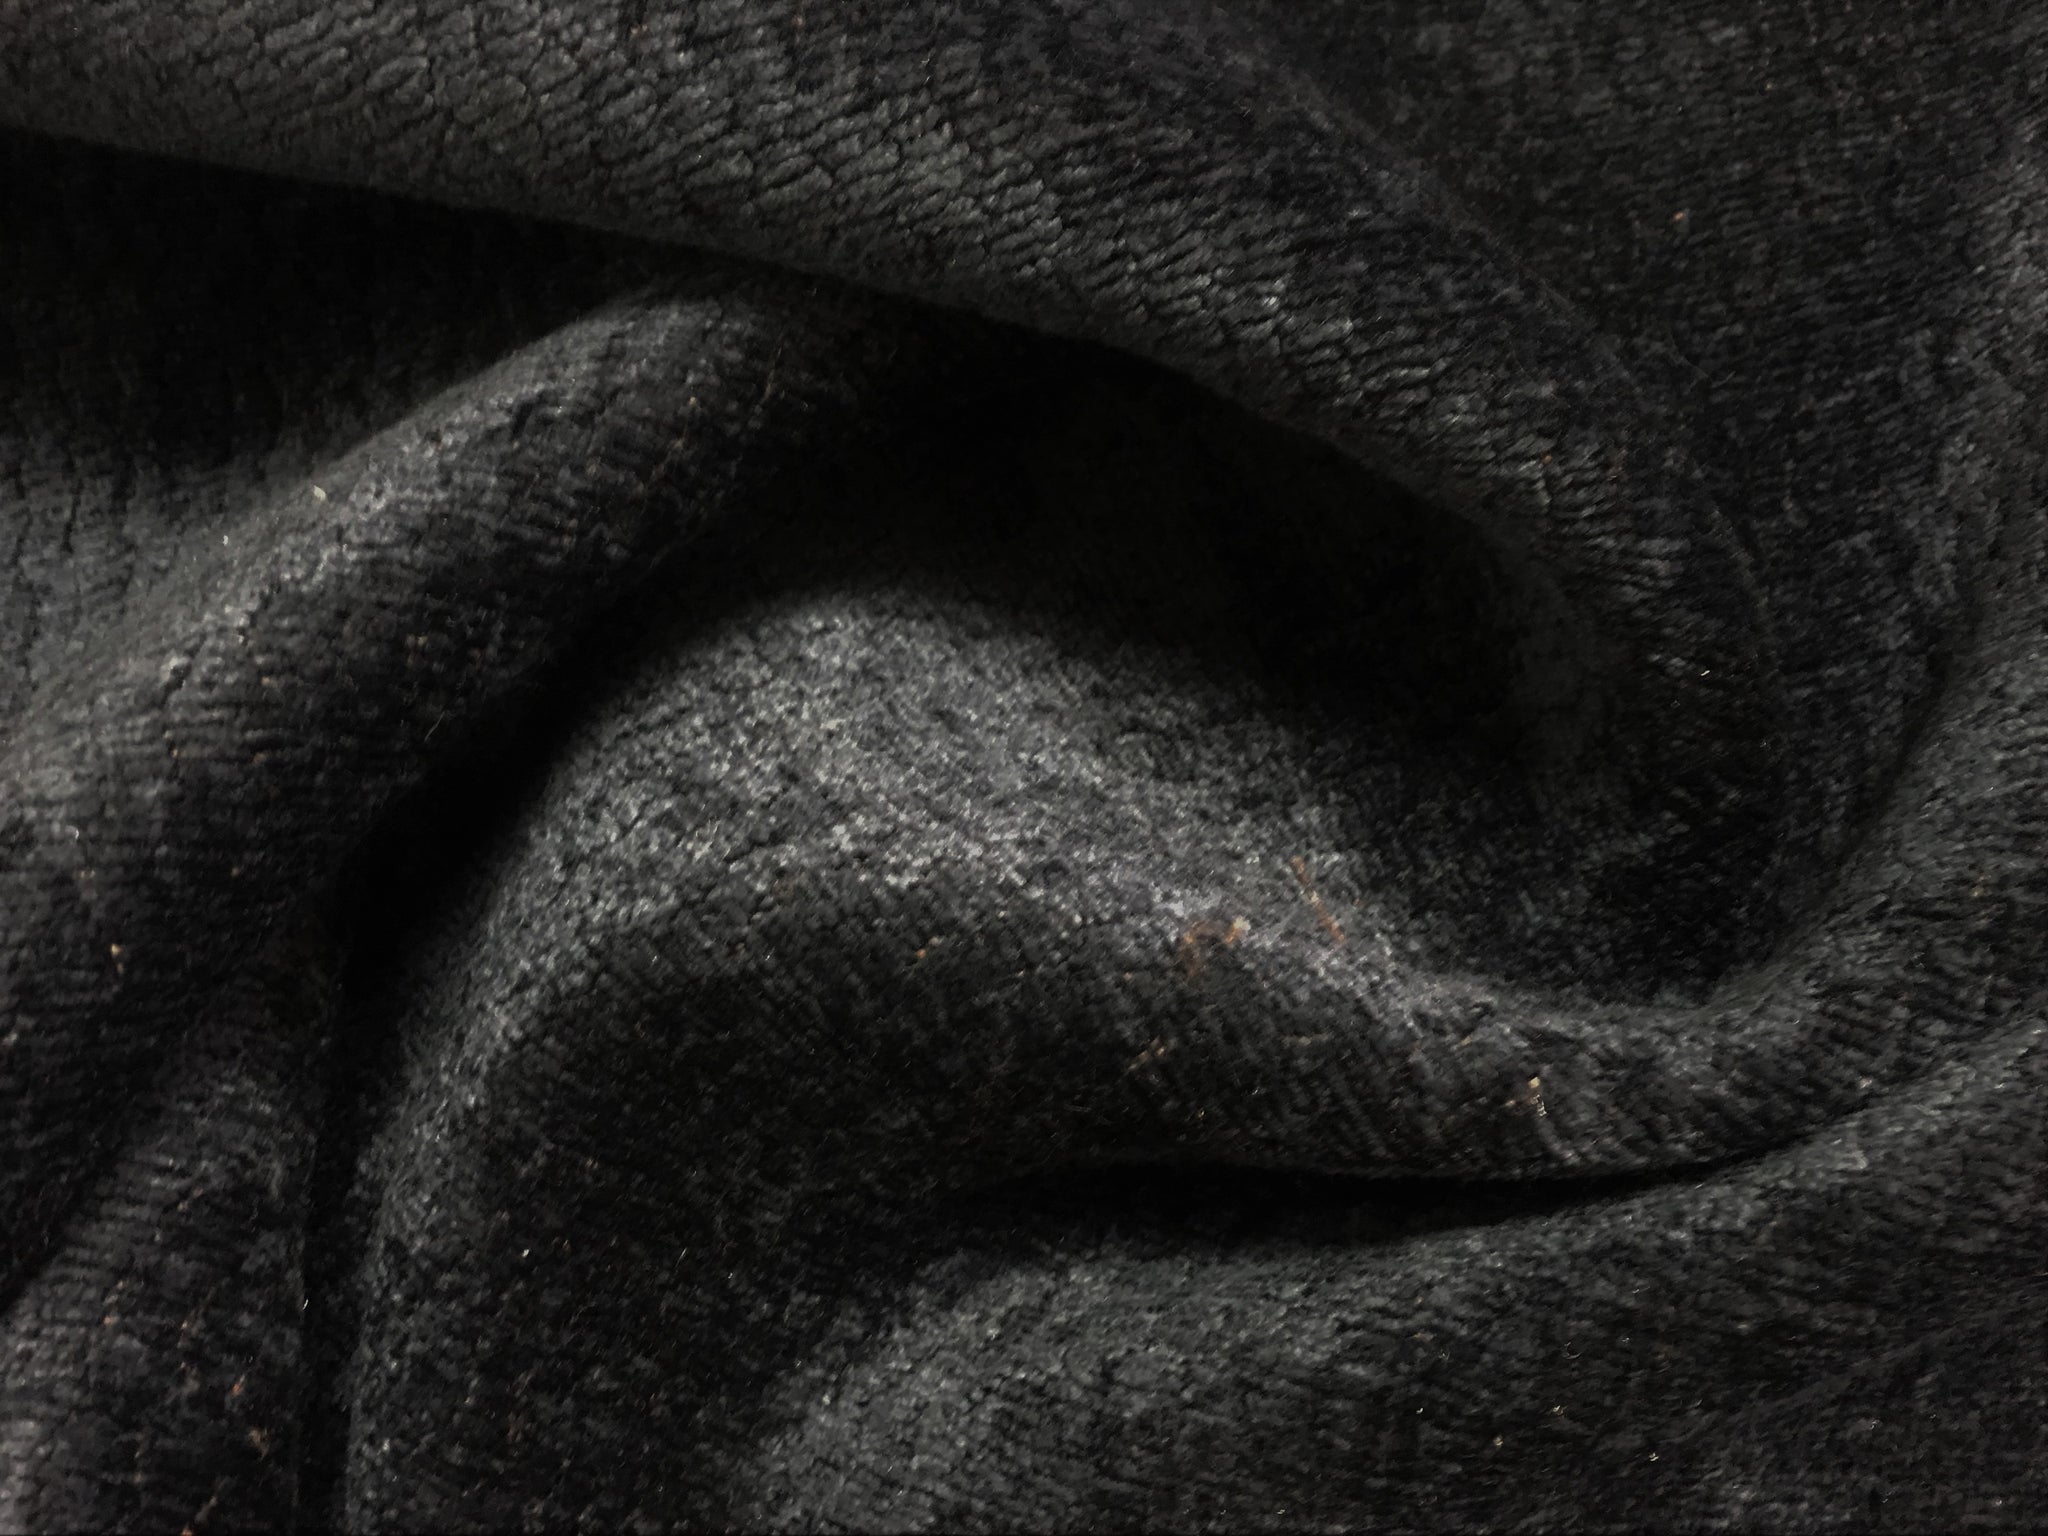 Carlton Charcoal Modern Chenille Upholstery Fabric